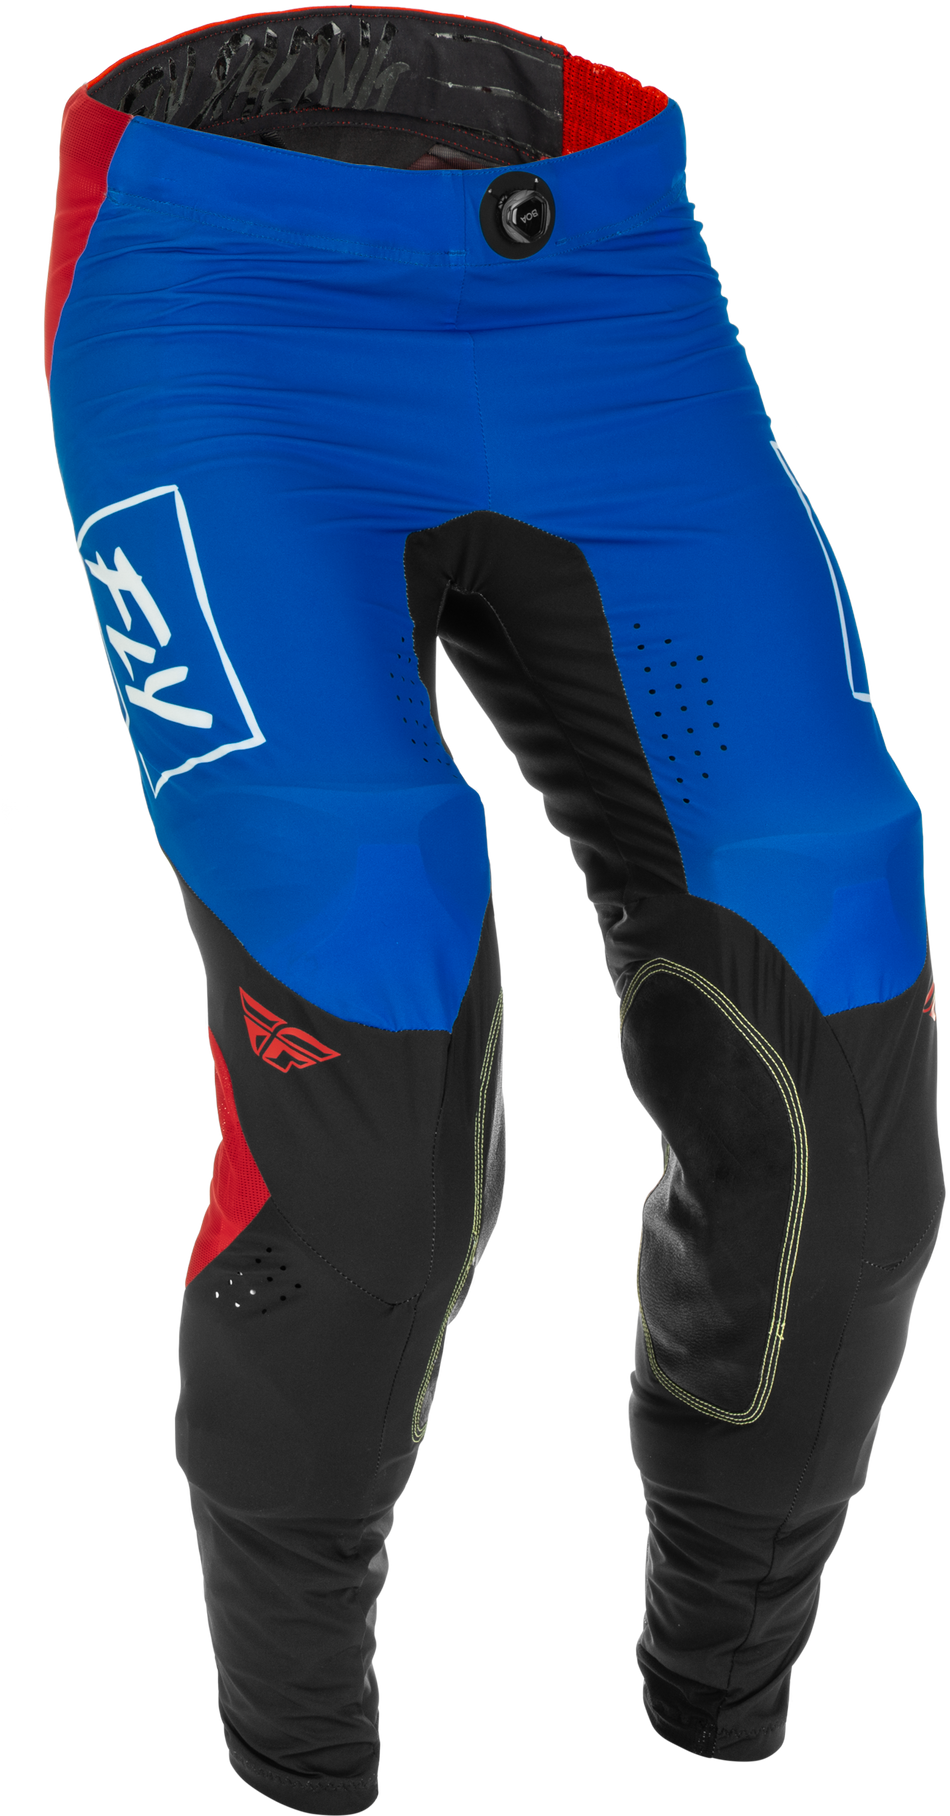 FLY RACING Lite Pants Red/White/Blue Size 28 375-73328